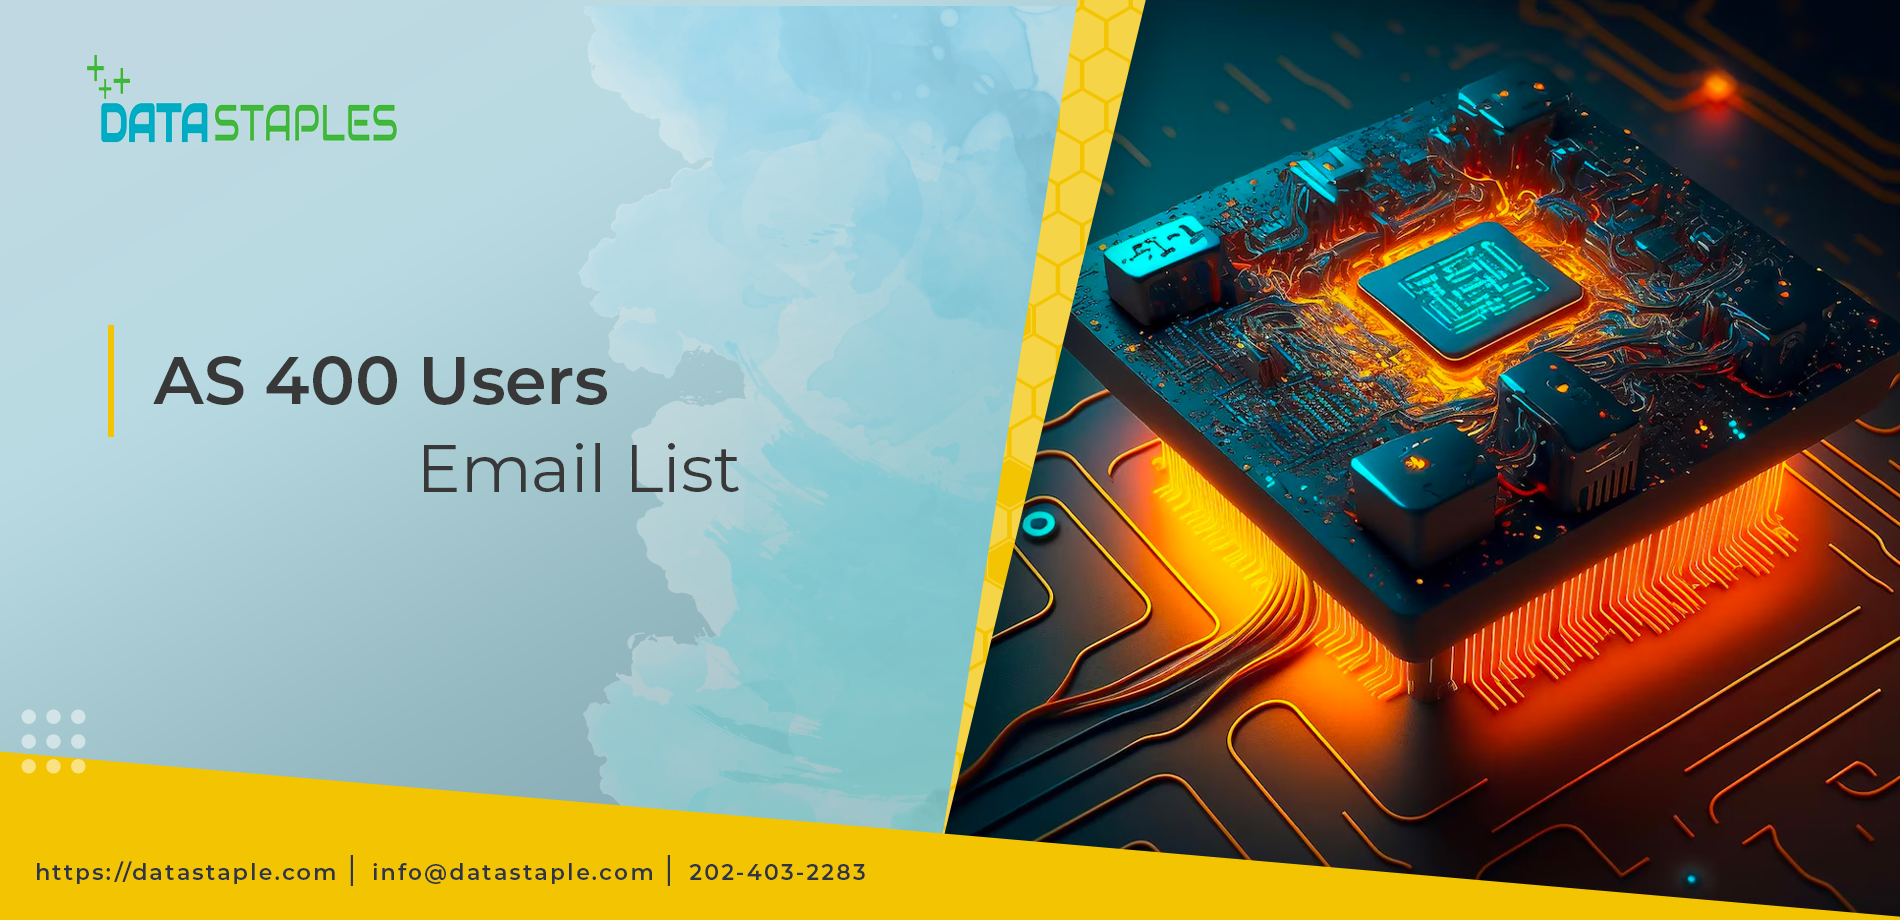 AS 400 Users Email List | DataStaples